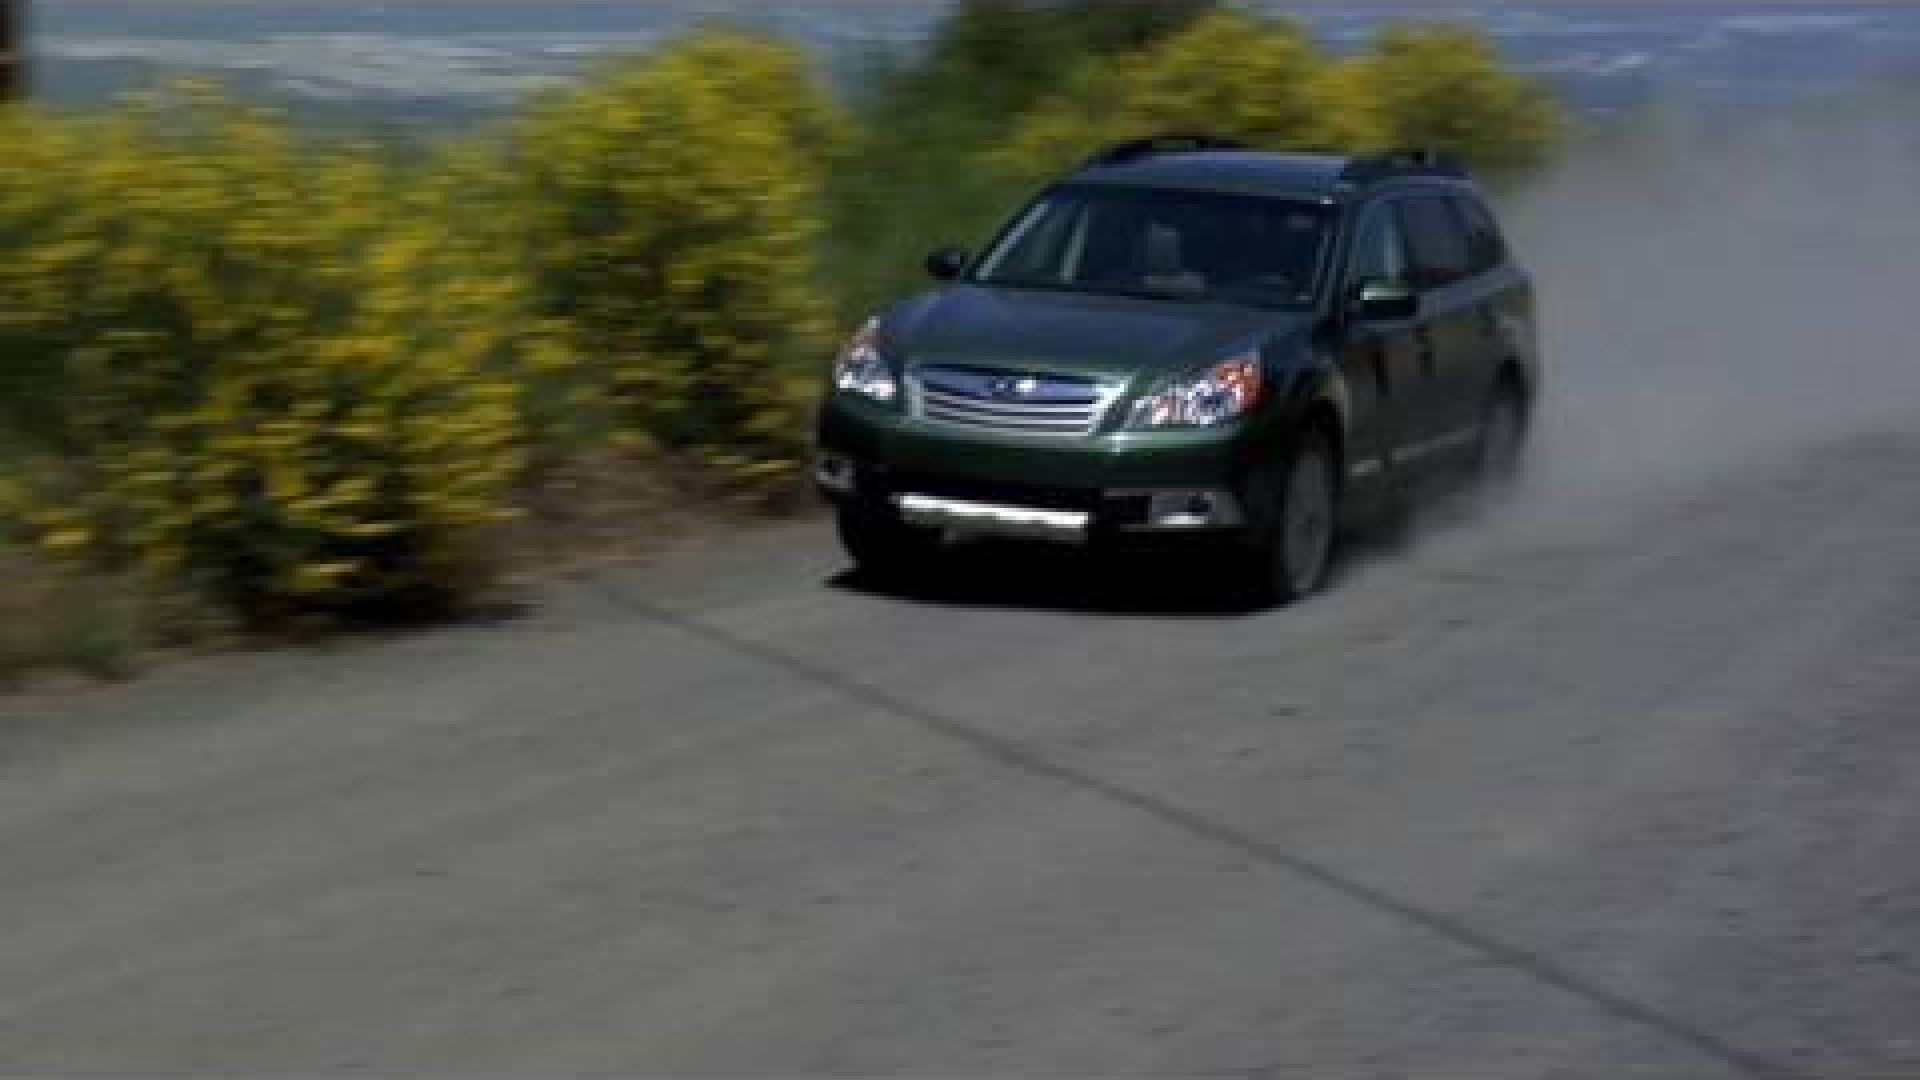 Subaru Outback On Street And Dirt